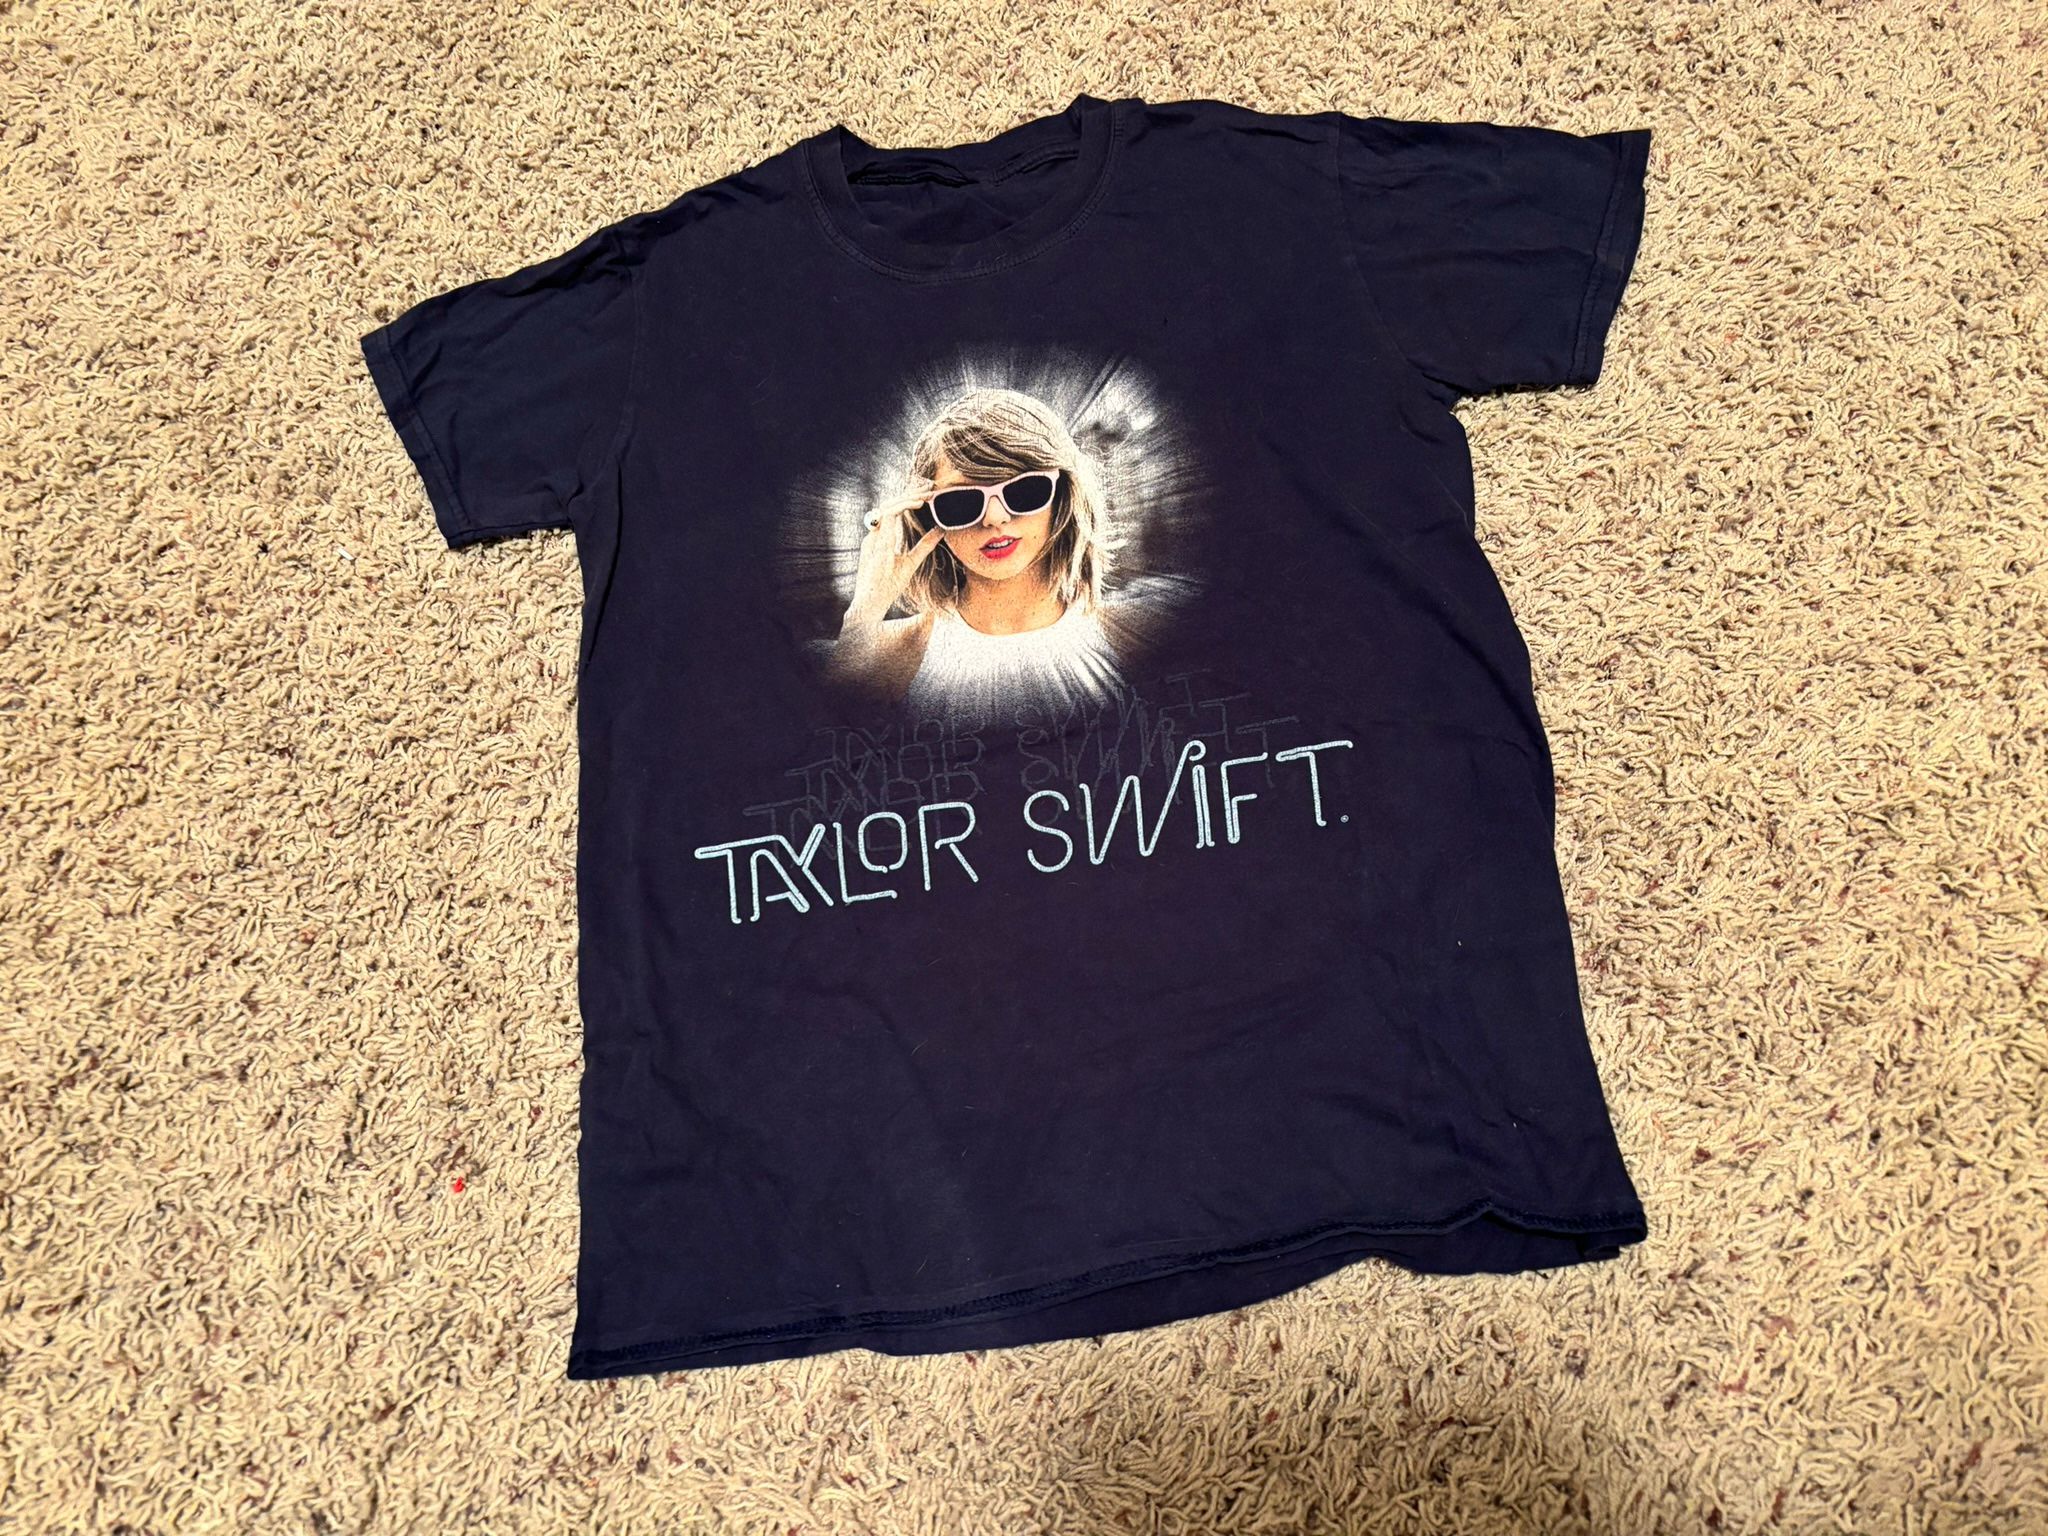 Taylor Swift The 1989 World Tour Concert Tshirt